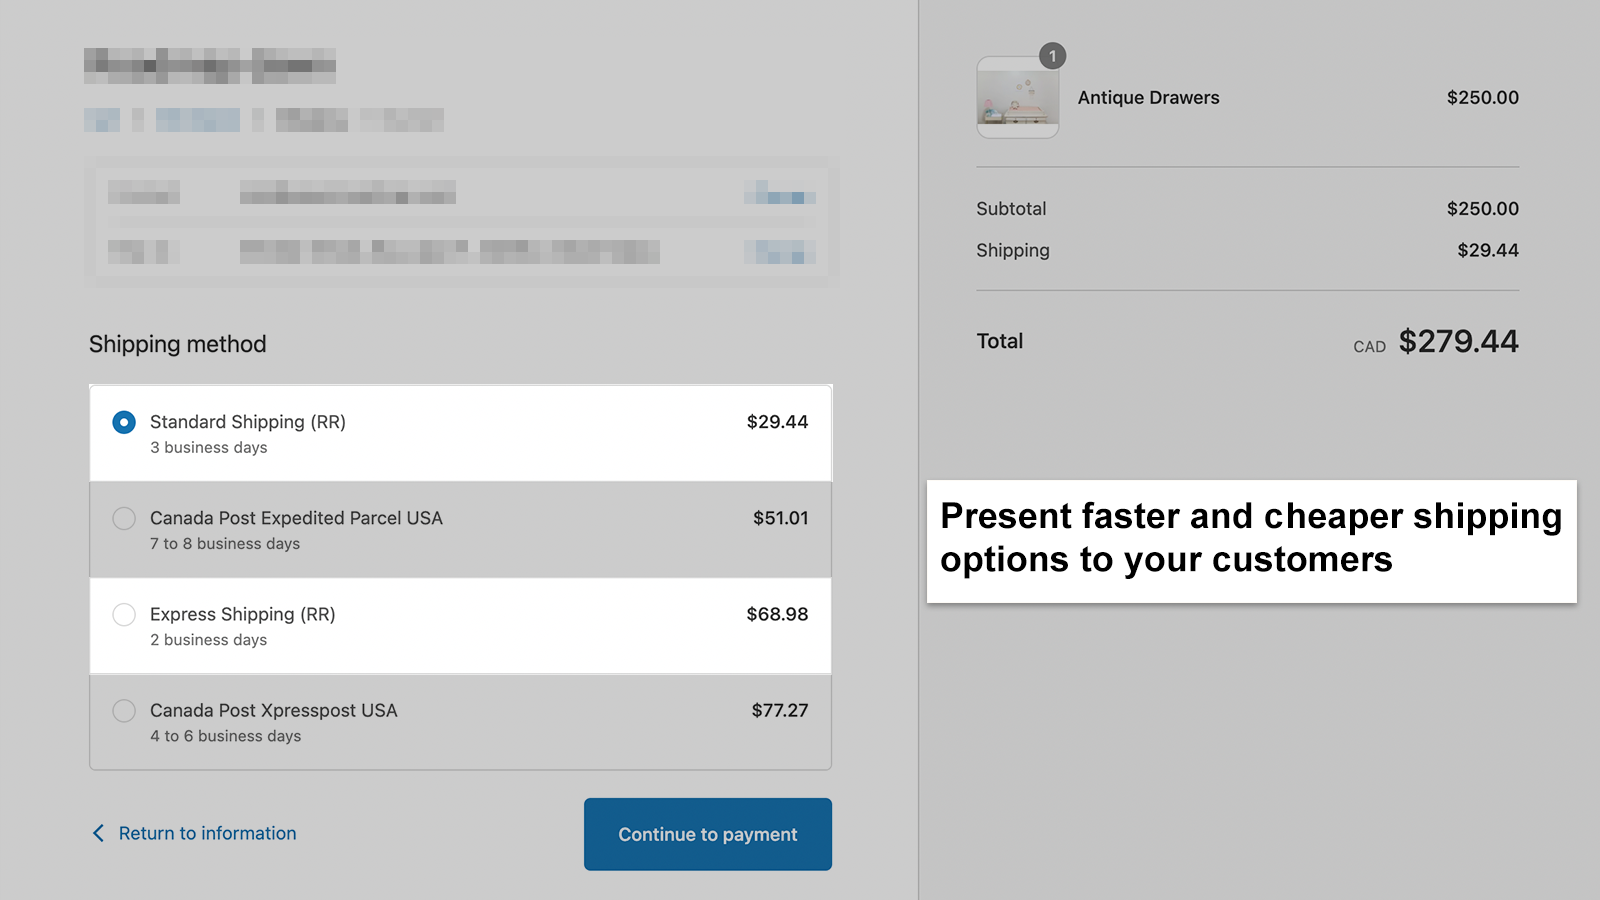 Present faster and cheaper shipping options to your customers